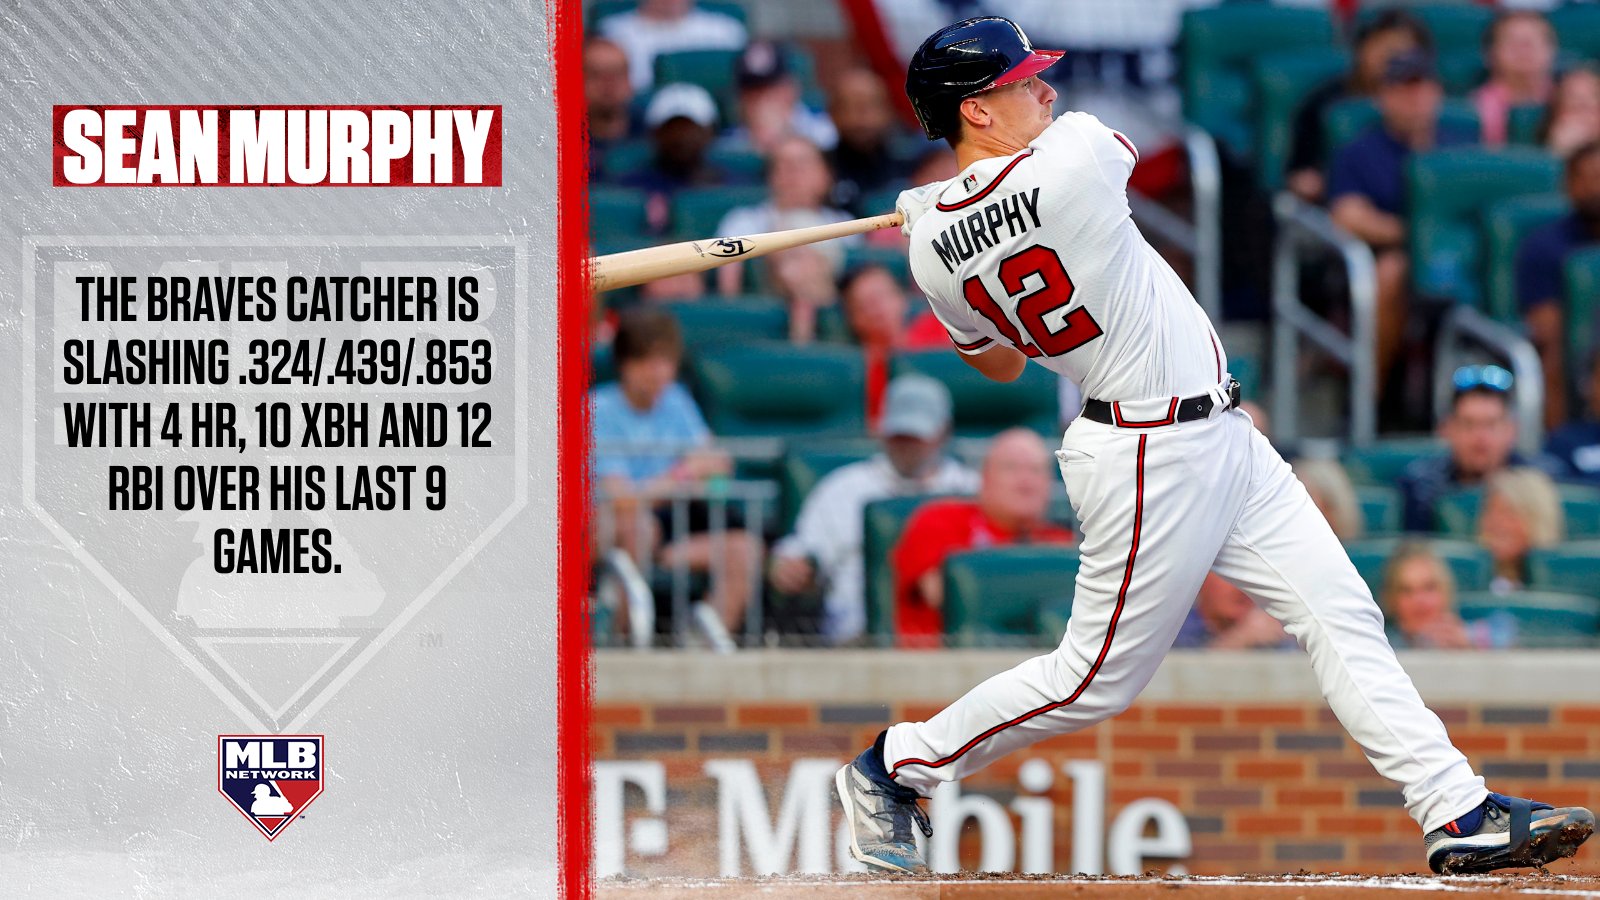 MLB Network on X: .@Braves catcher Sean Murphy has been a